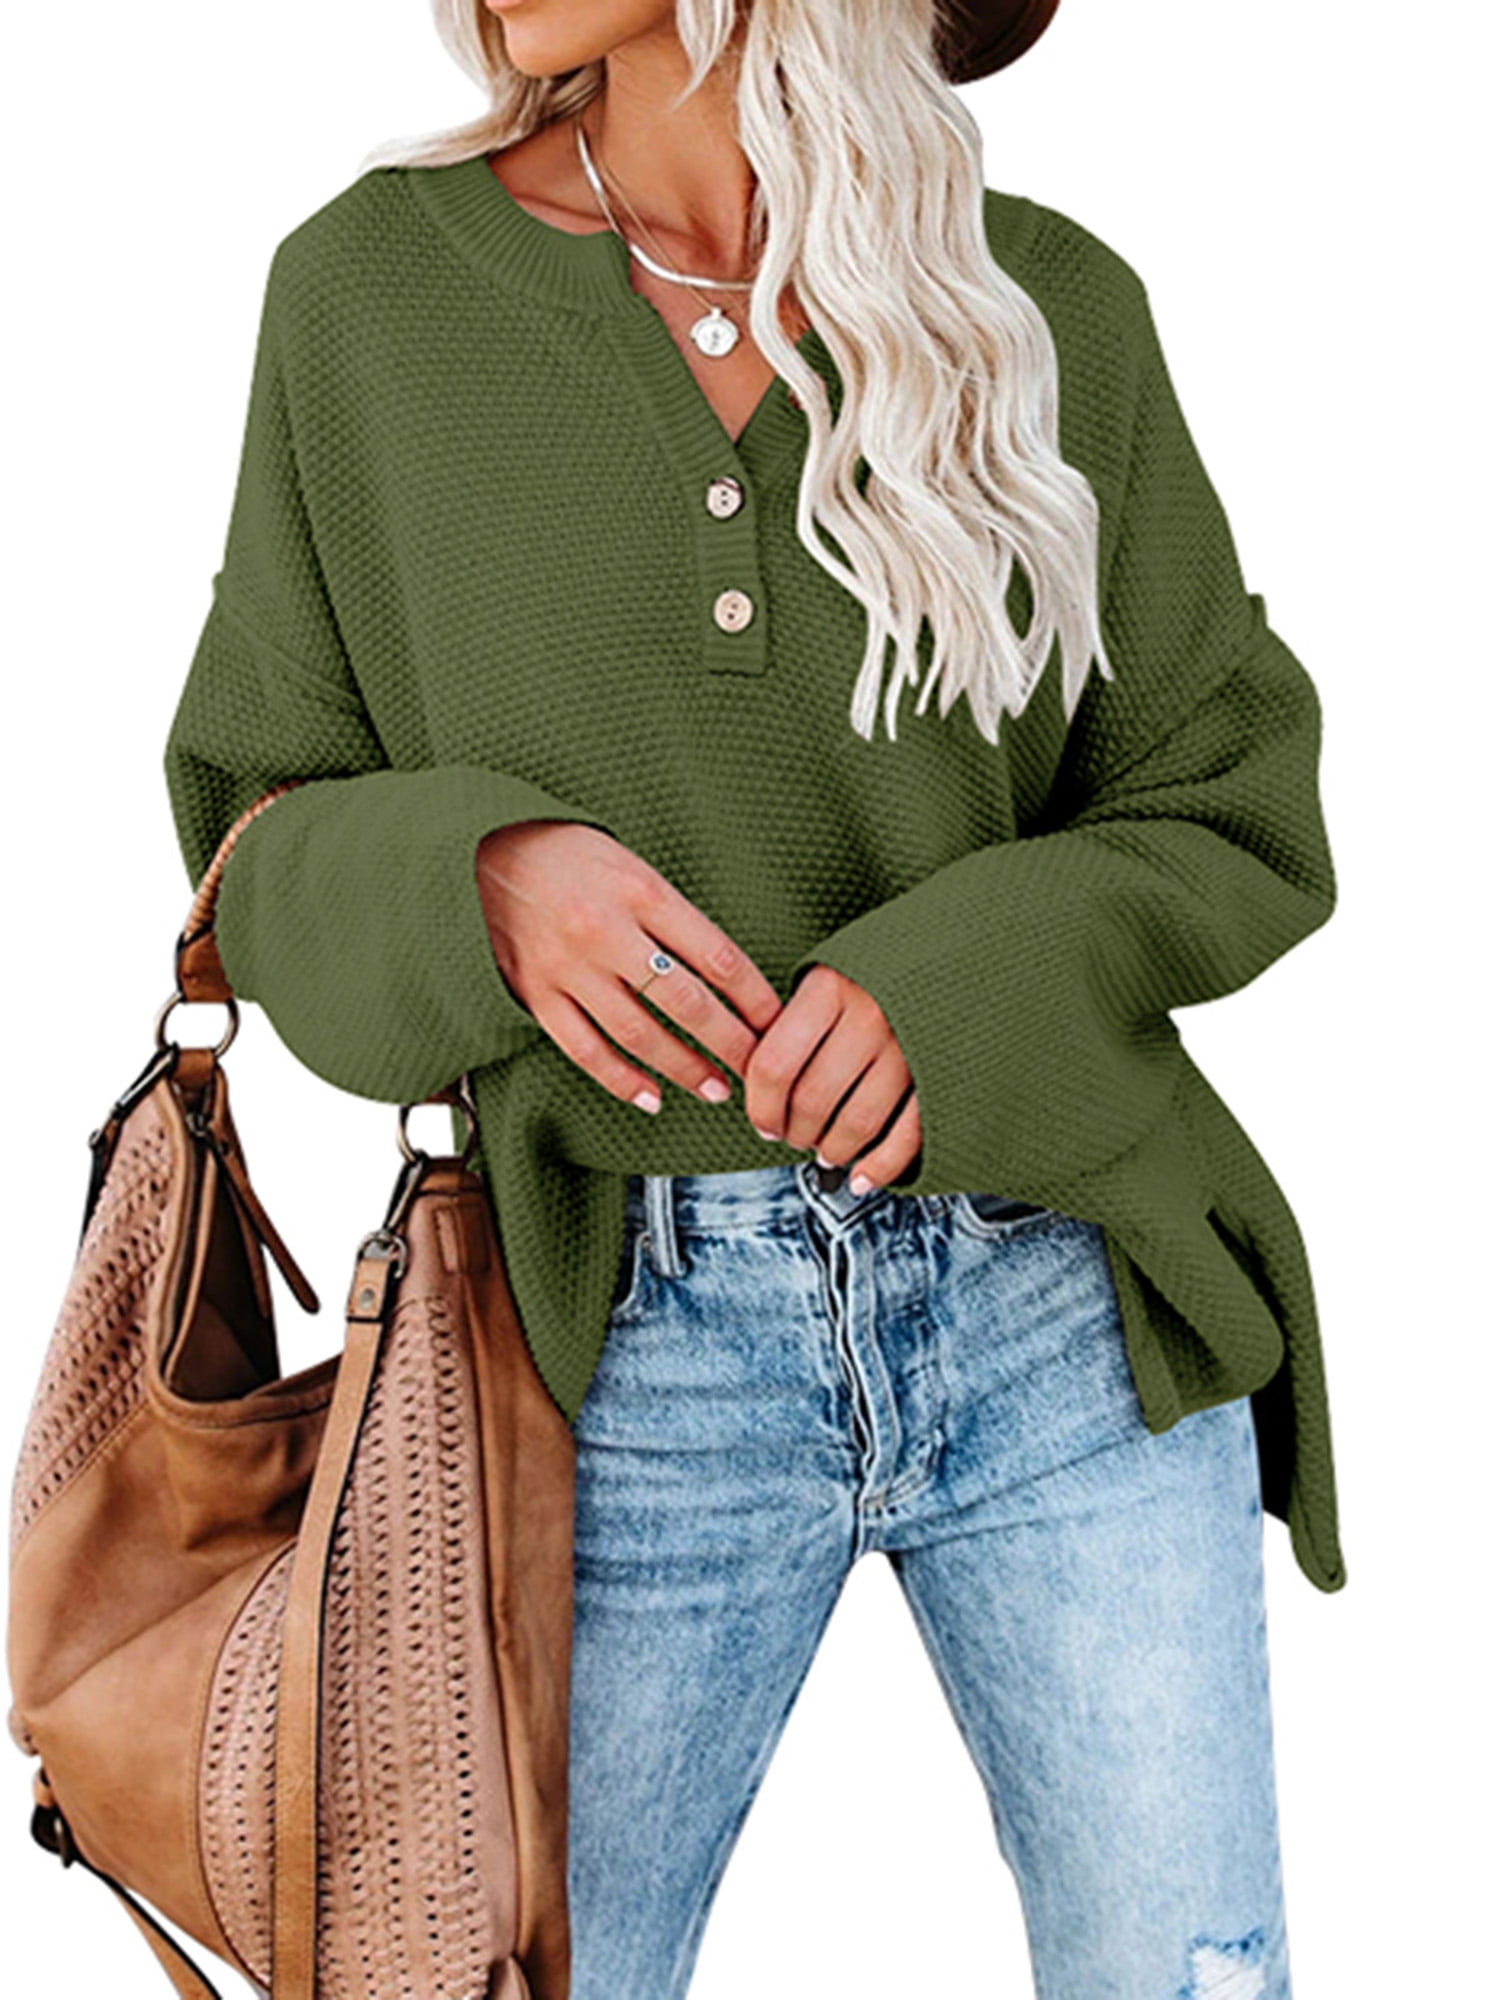 Musuos Muyogrt Retro Women Sweater Pullovers Knitted Casual Solid ...